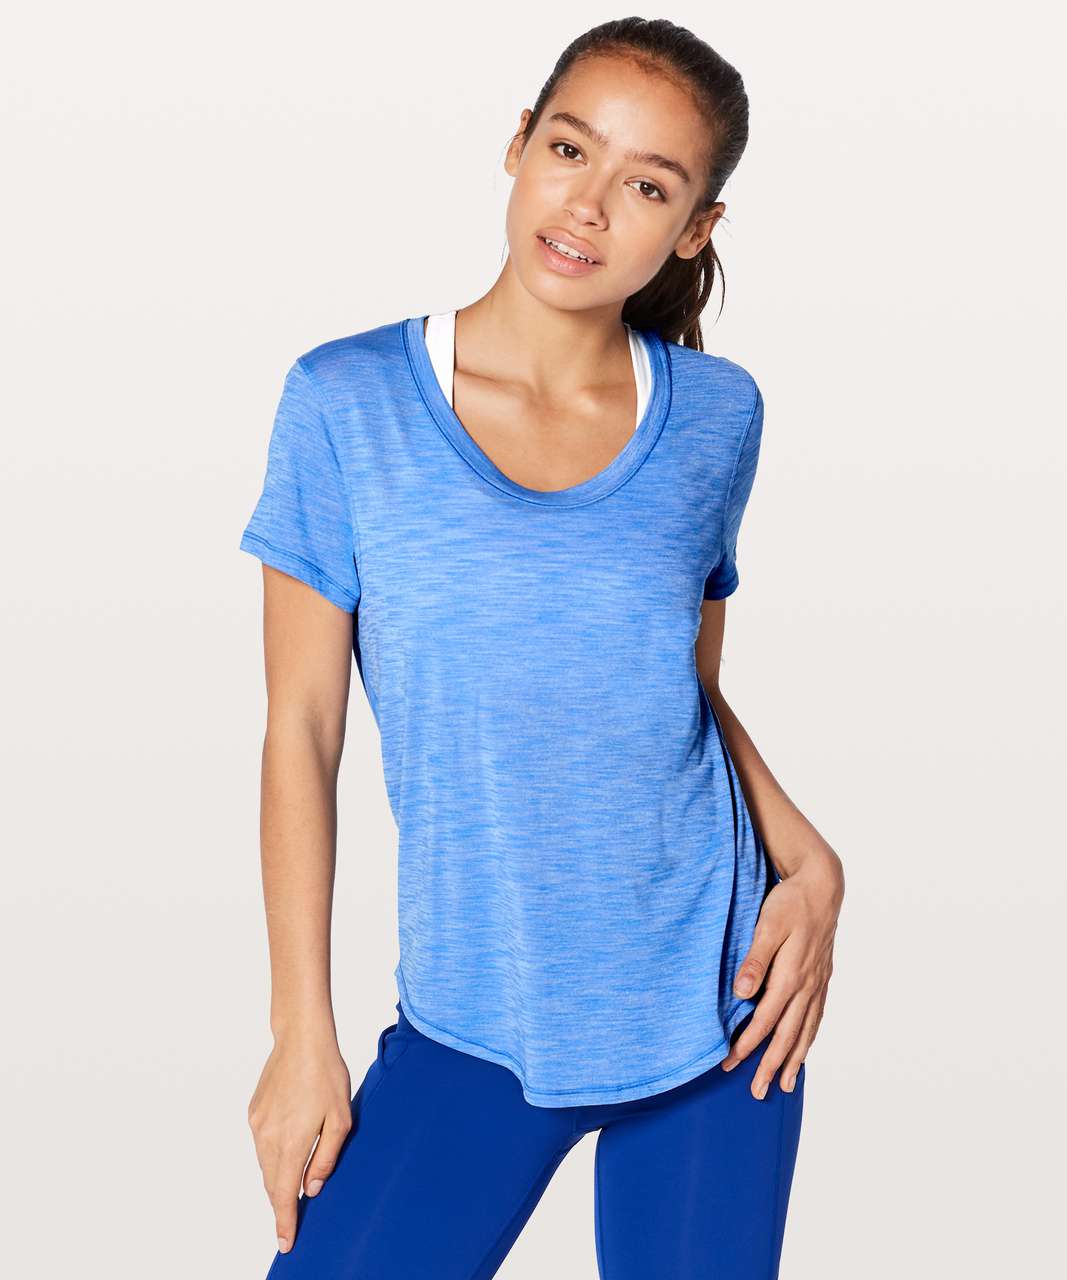 Lululemon Meant To Move Tee - Heathered Cosmos